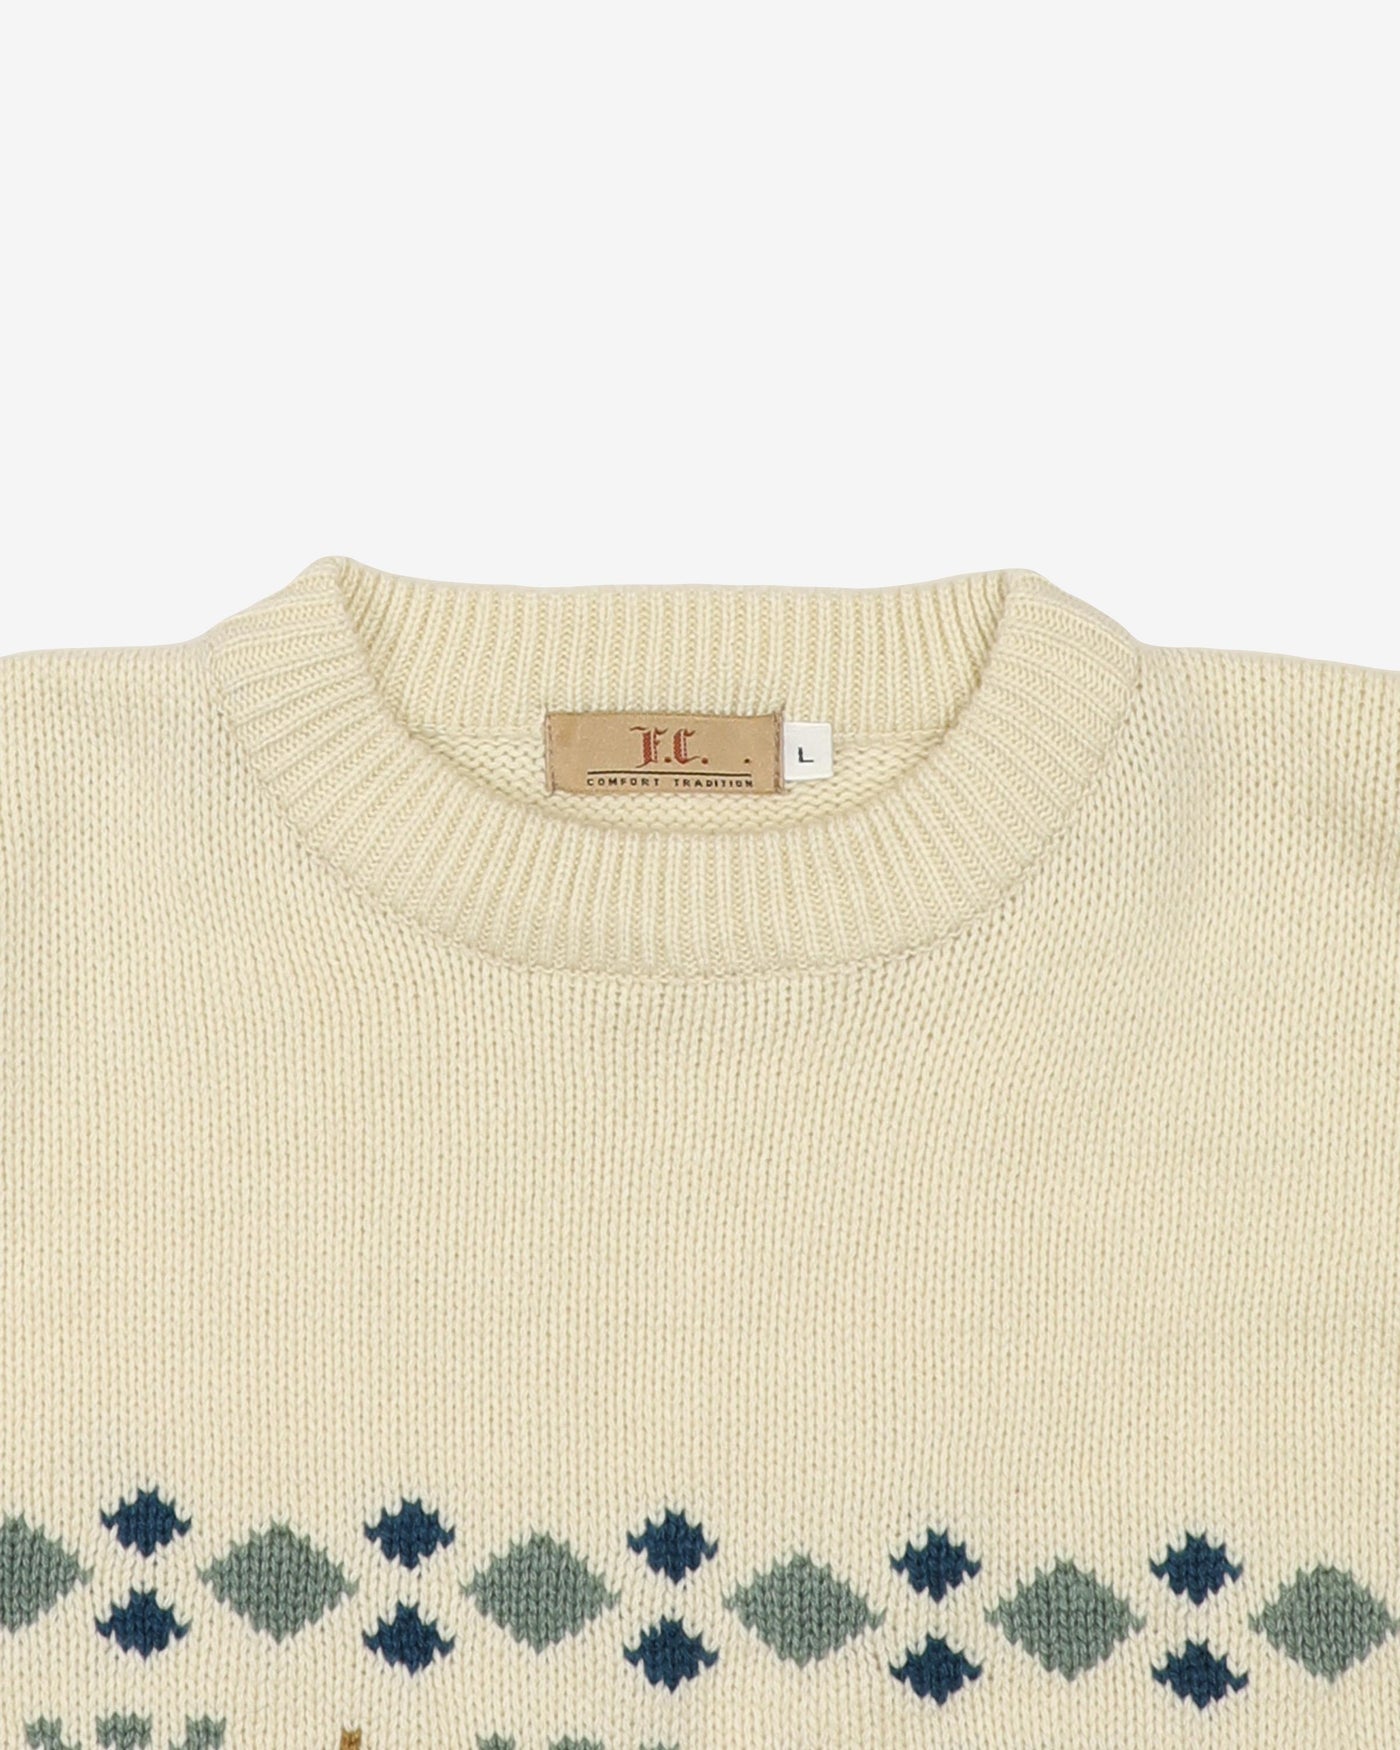 Vintage 90s White / Brown Patterned Wool Knit - L